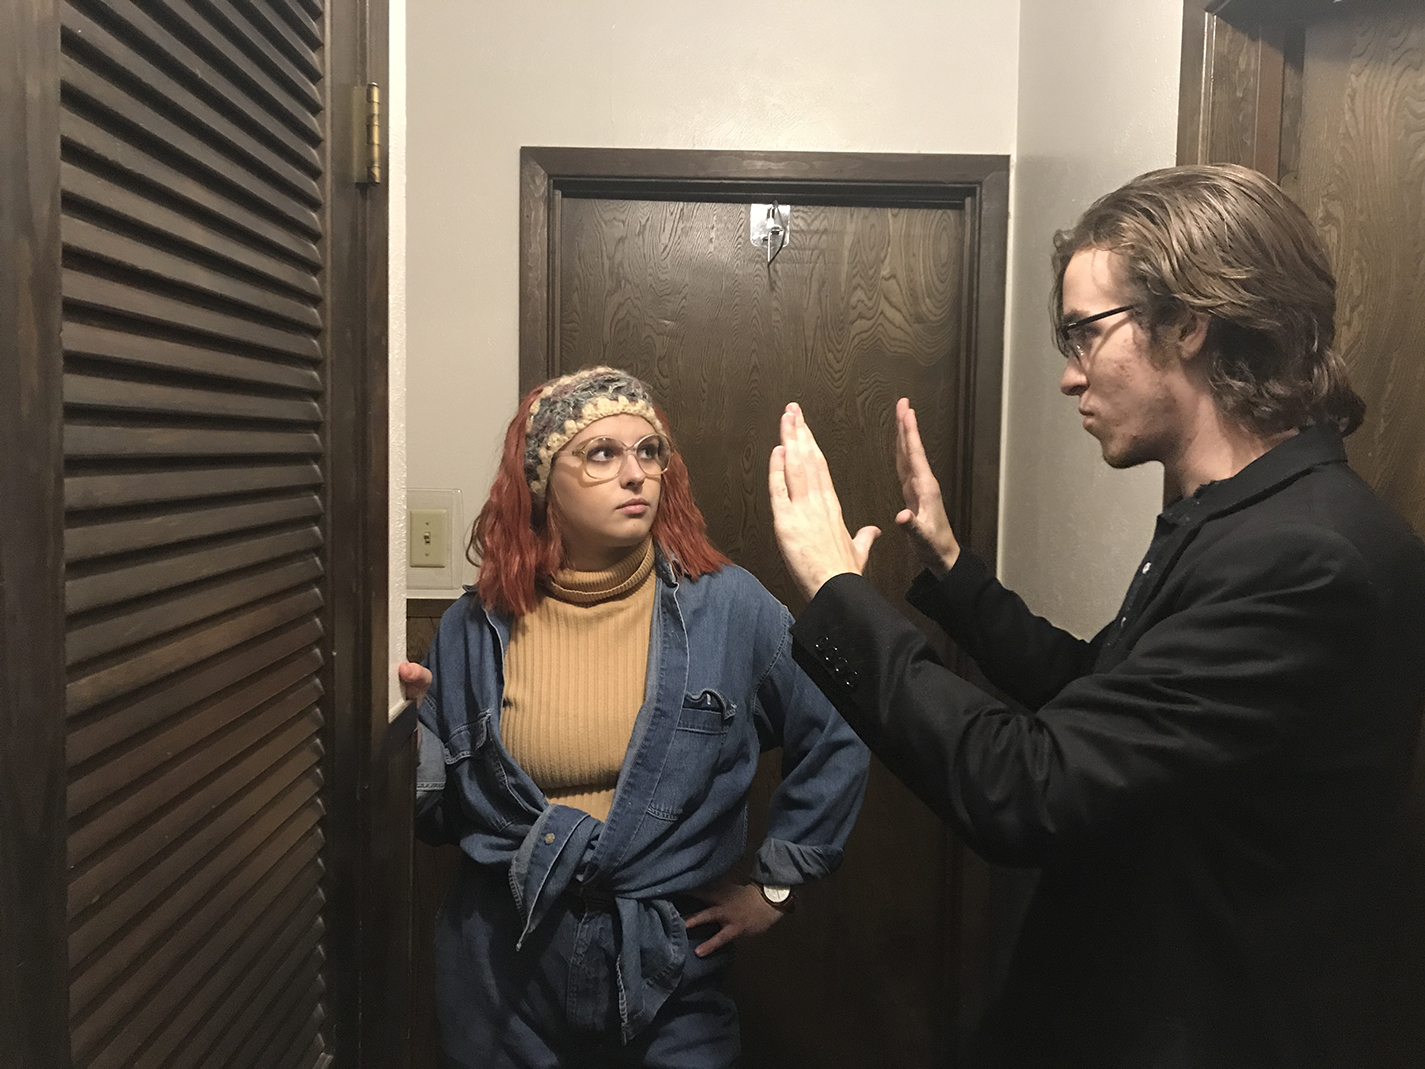 NE student Alex Wagner coaches actress Macy Feemster during a scene. Wagner wrote and directed his own film that he submitted to the Student Horror Film Festival.